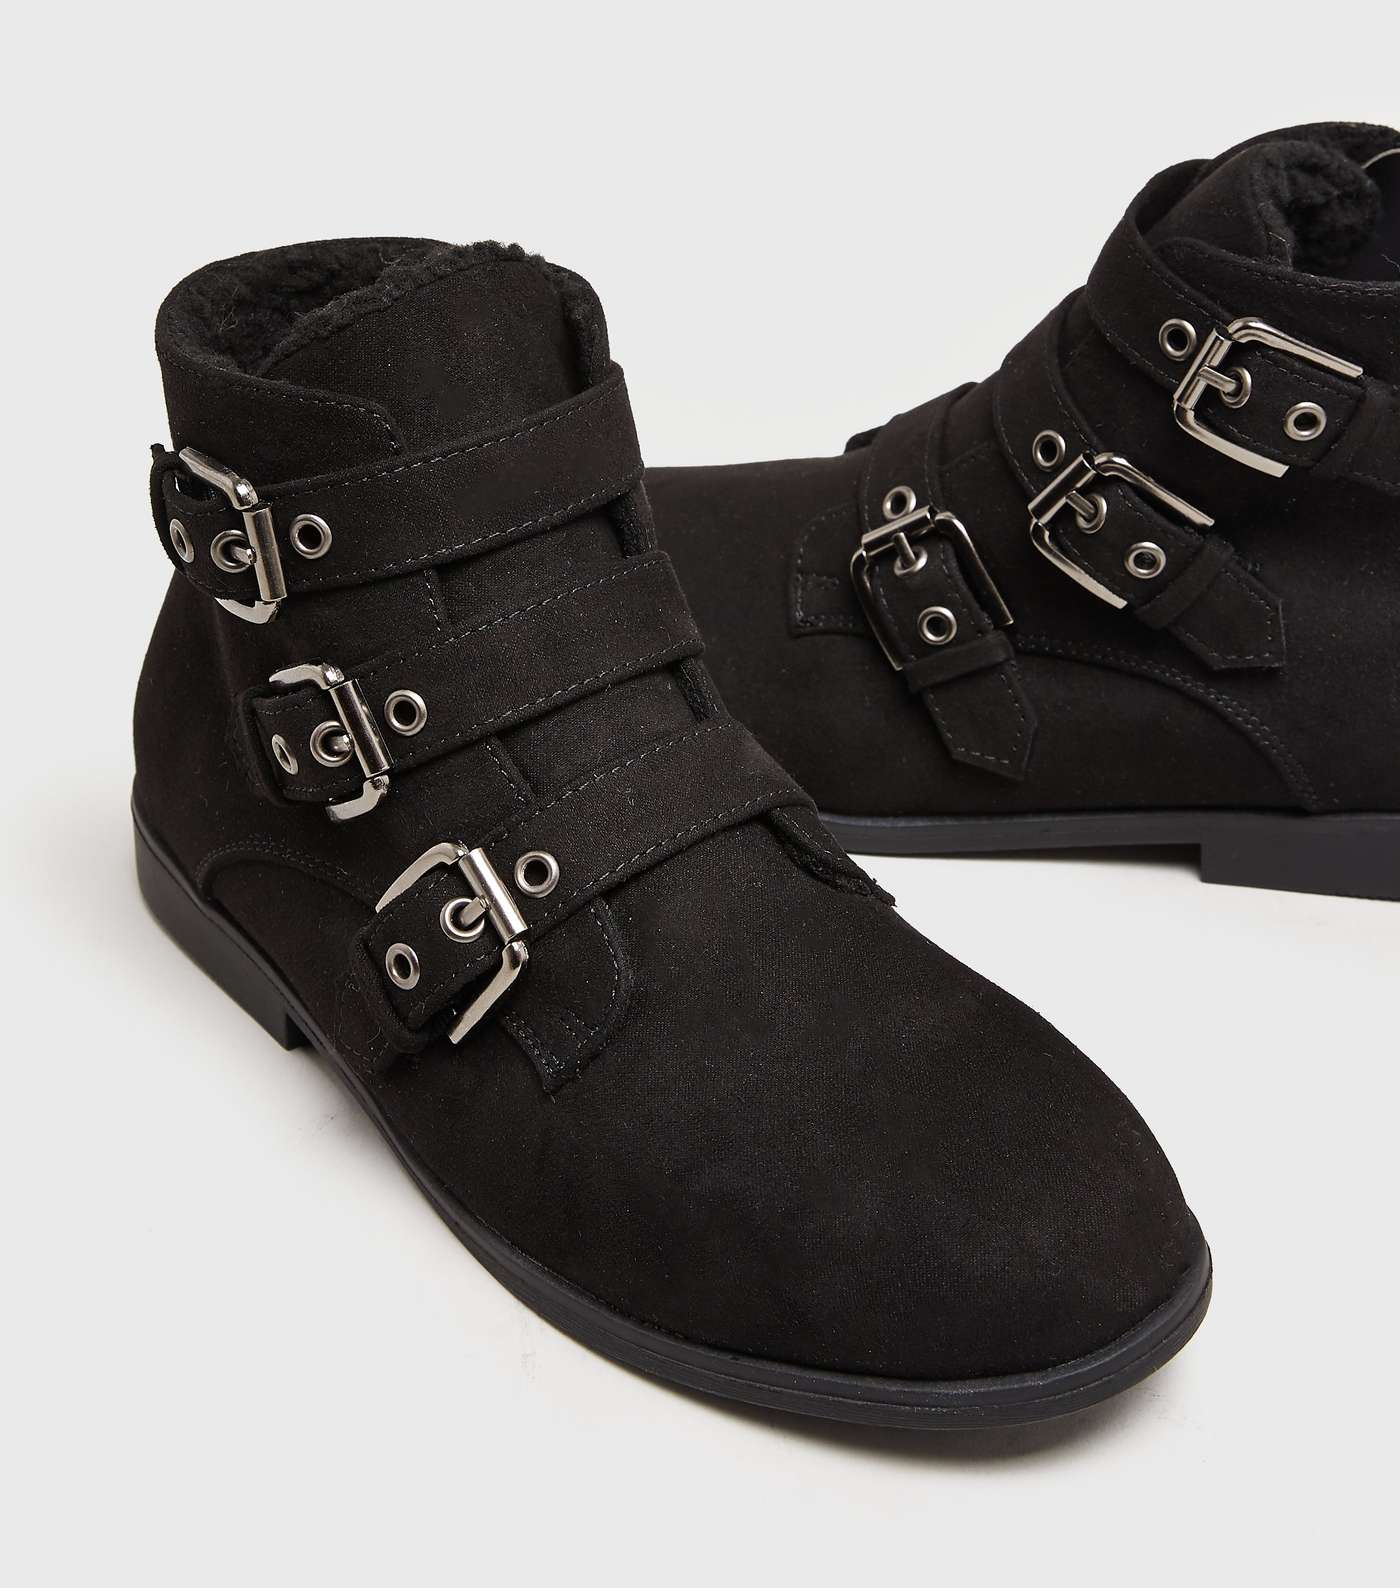 Girls Black Suedette Teddy Lined 3 Buckle Boots Image 2